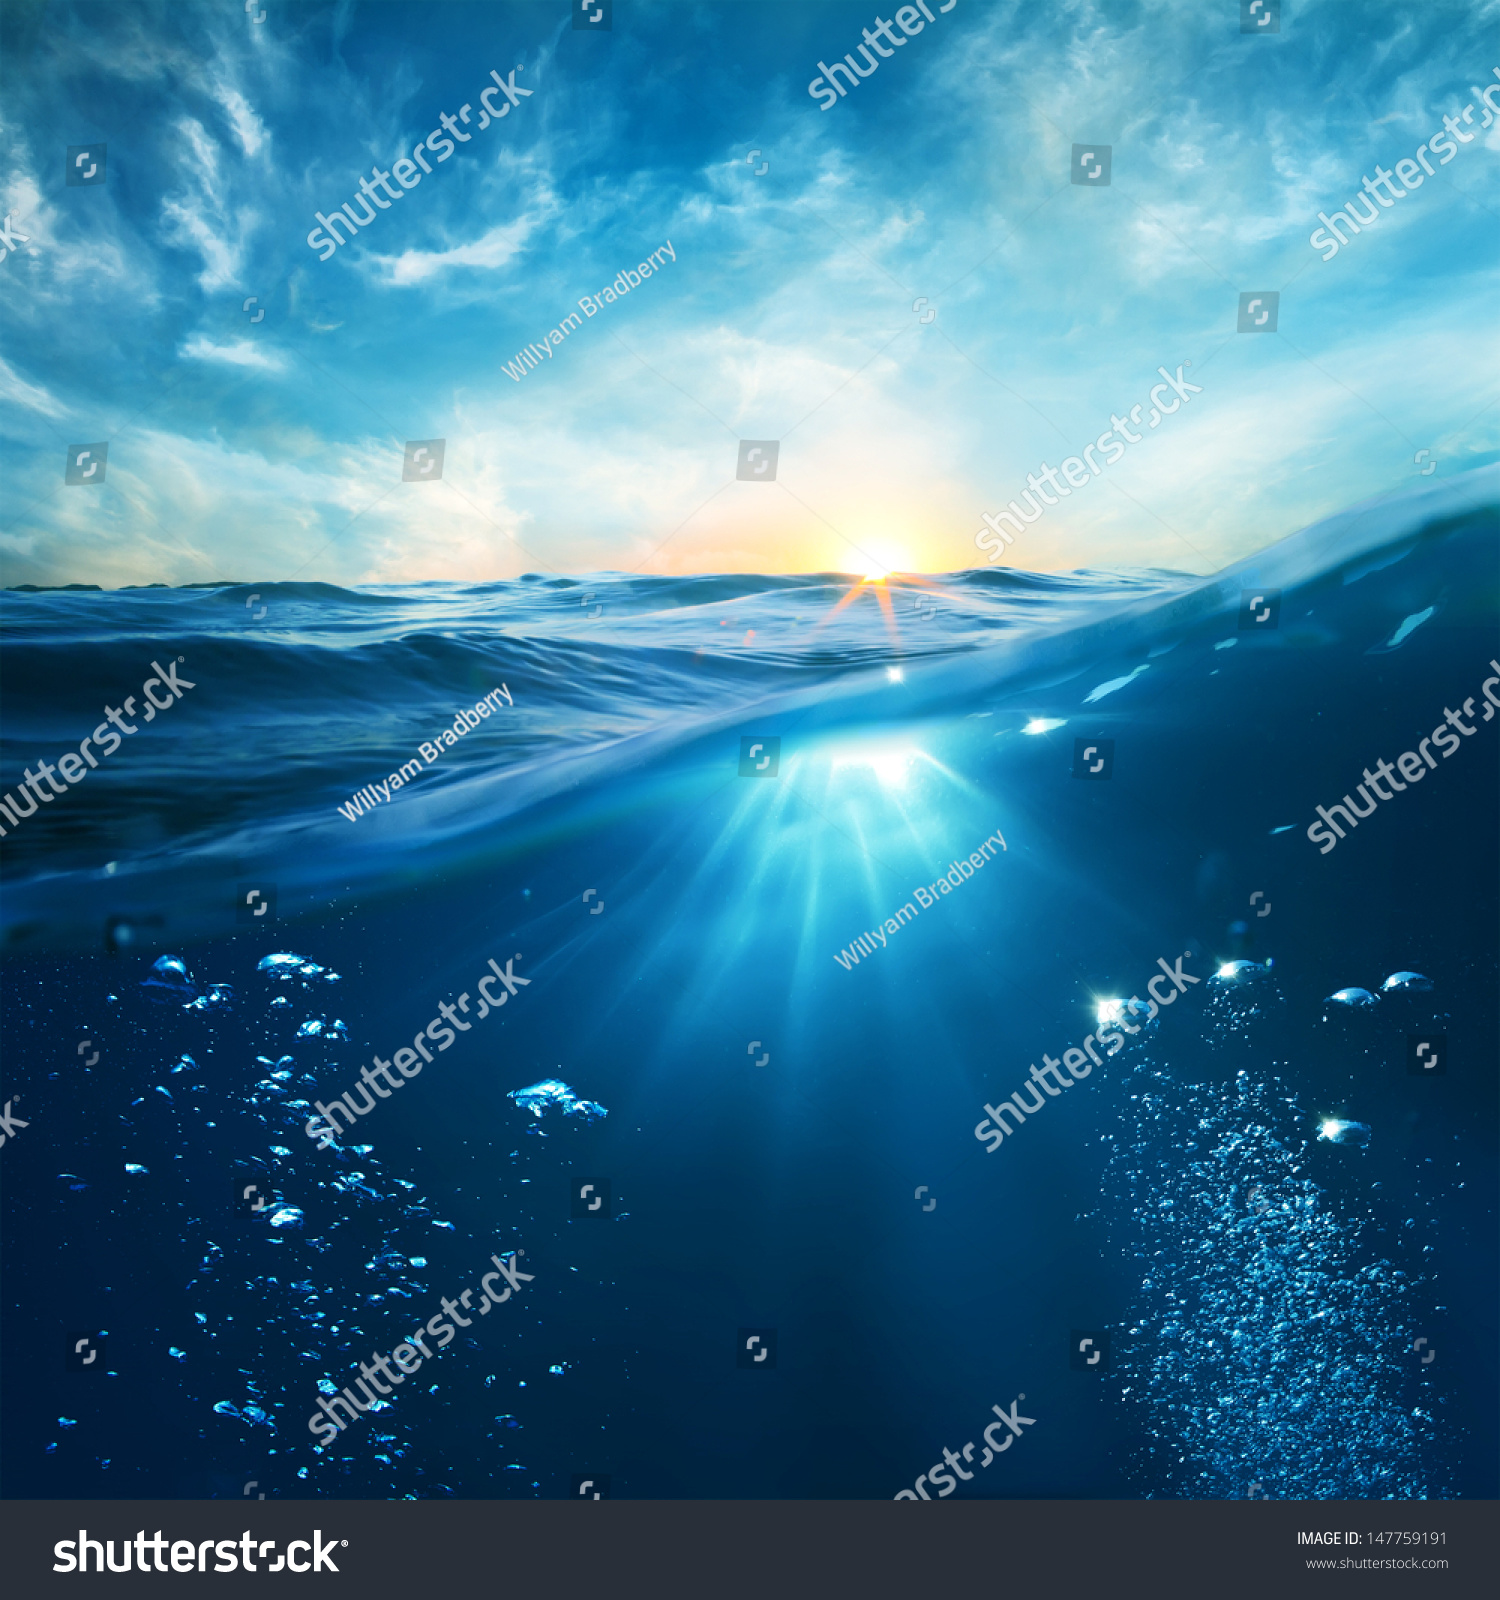 design template with underwater part and sunset skylight splitted by waterline  #147759191